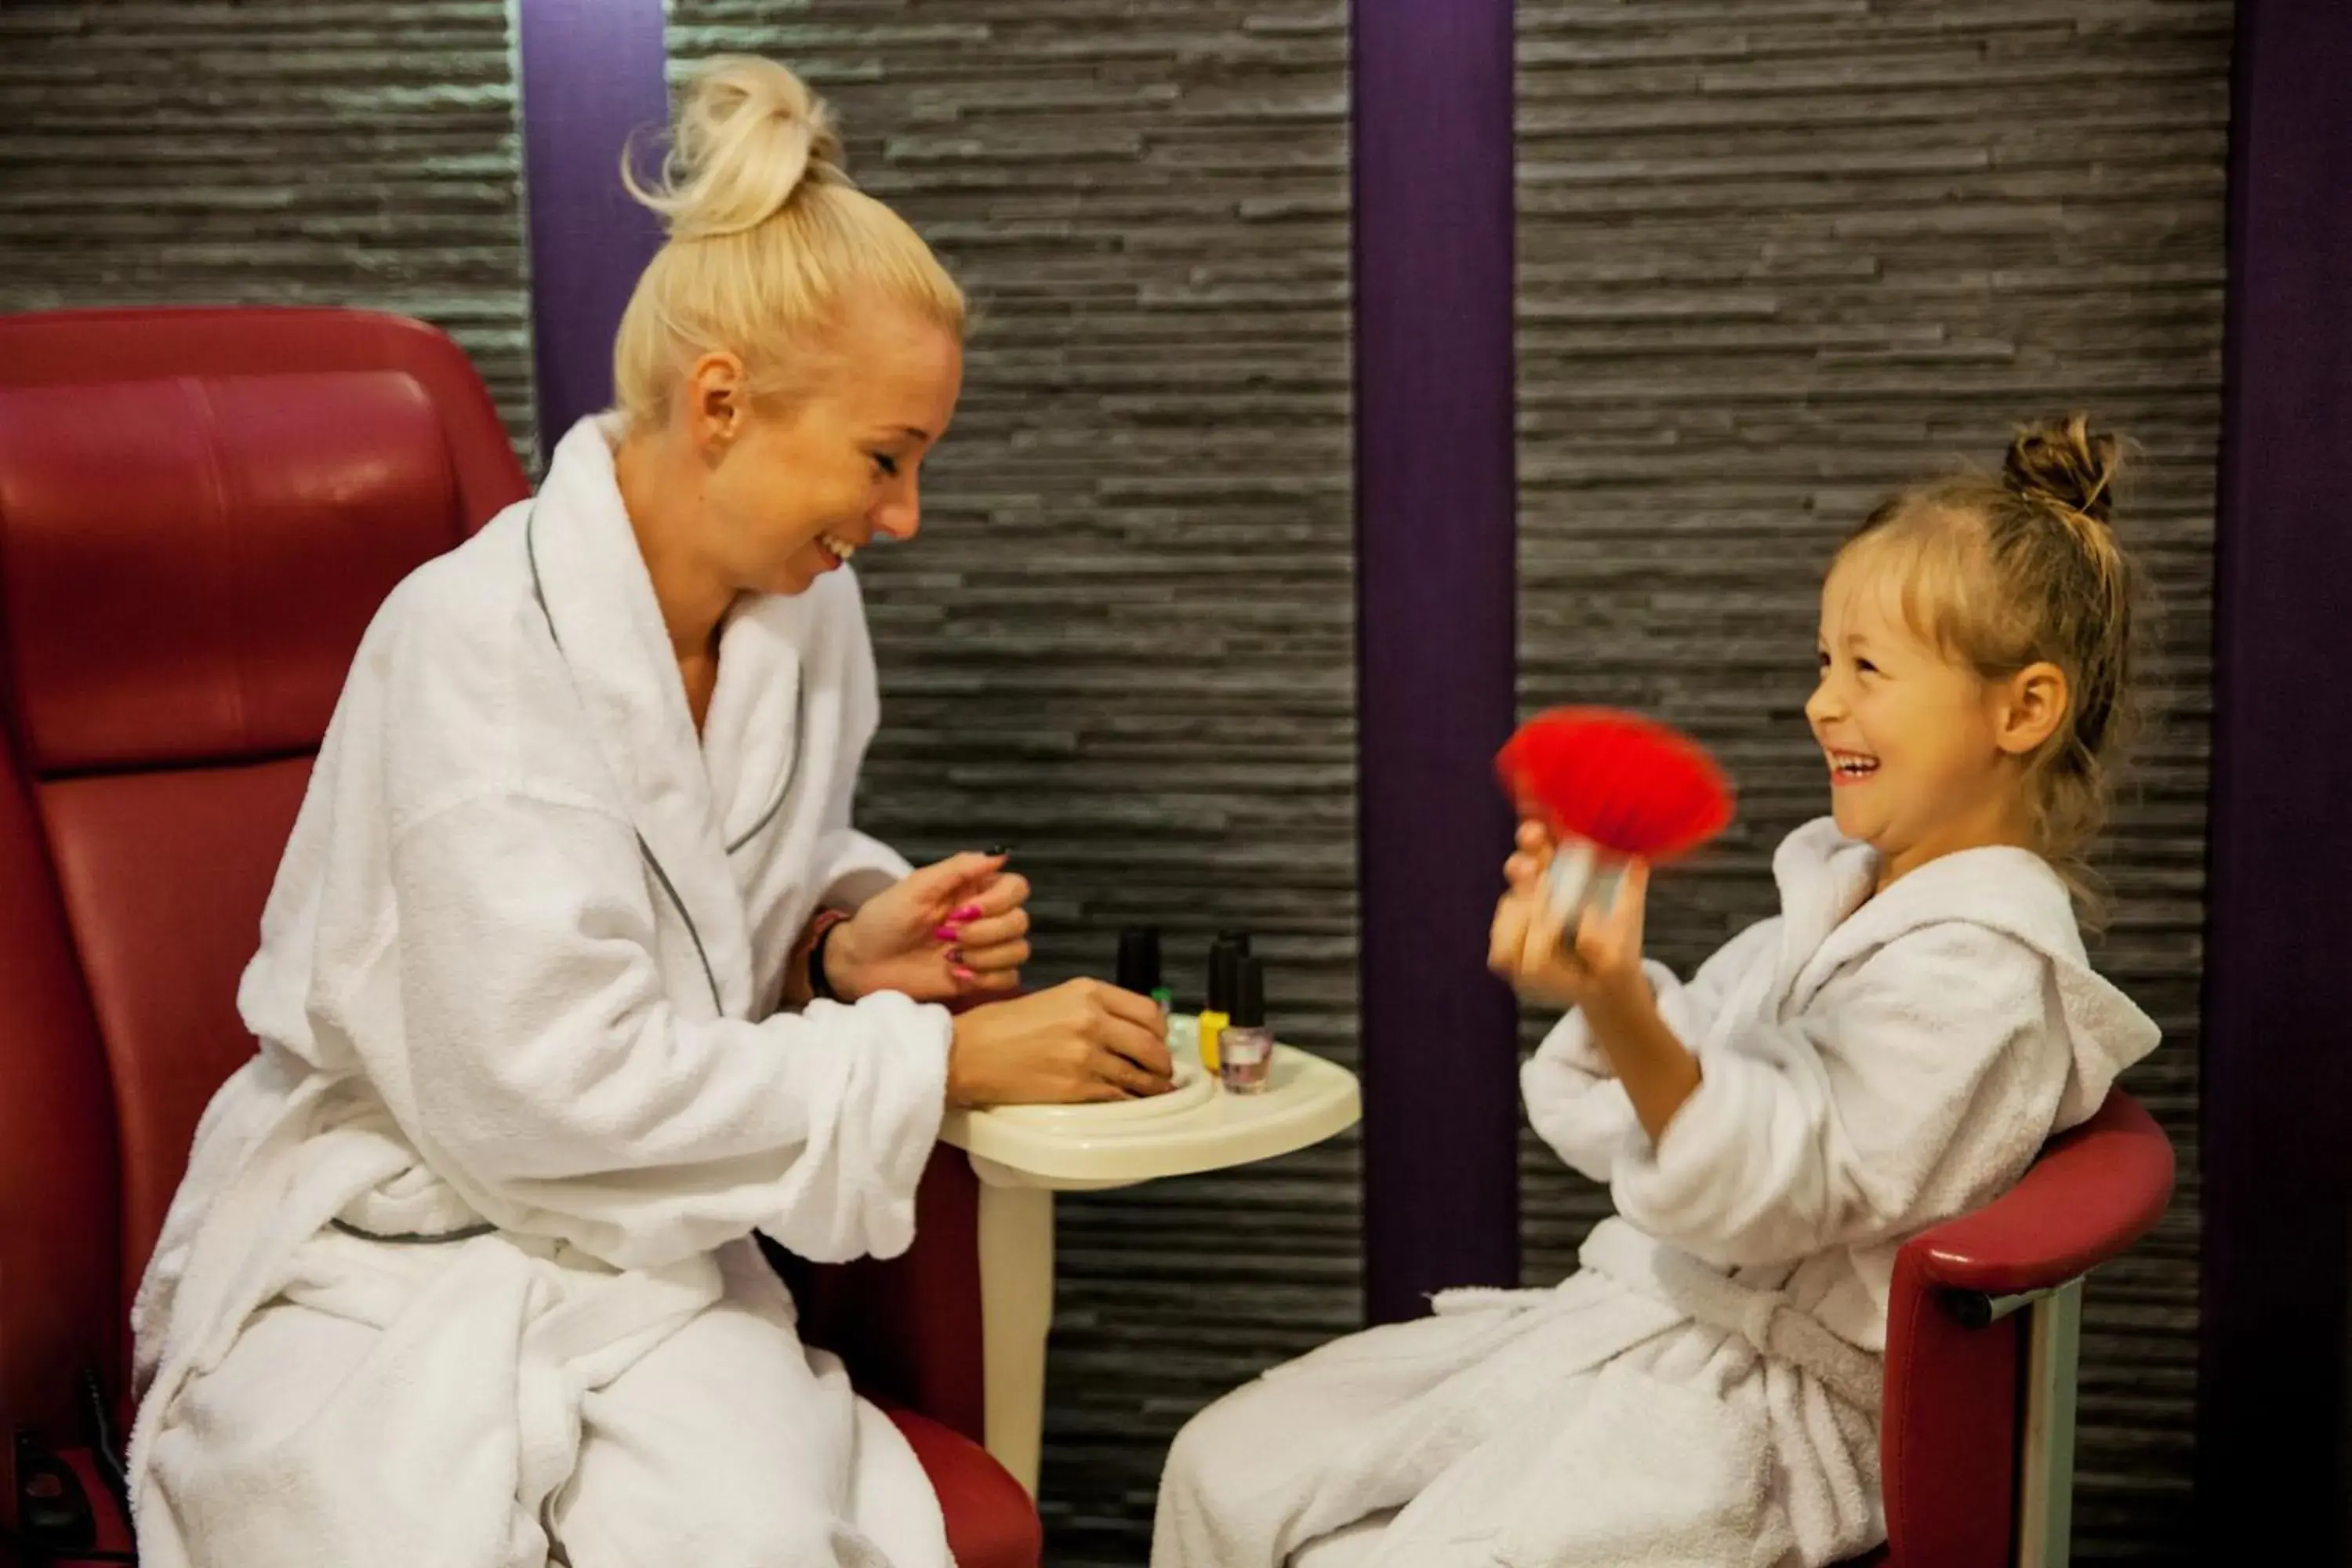 Spa and wellness centre/facilities in Hotel Lidia Spa & Wellness